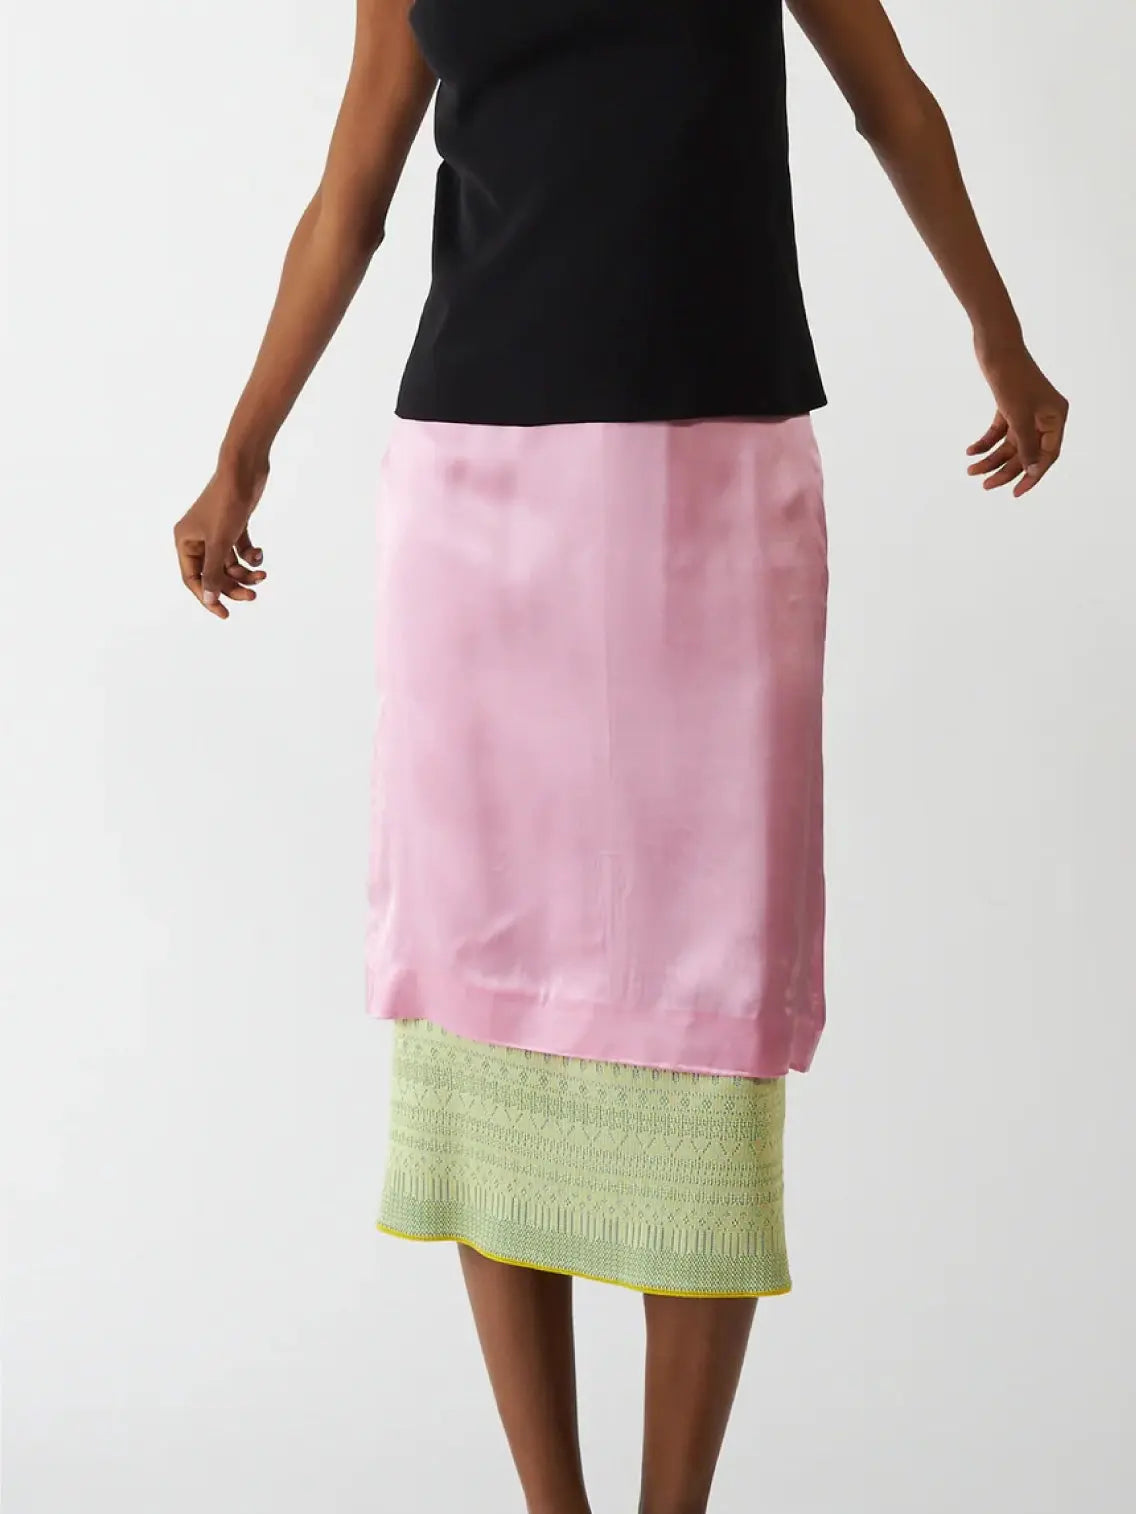 A person is wearing a black sleeveless top paired with the Vivi Skirt Candy by Bielo, a knee-length pink silk skirt layered over a pastel green crocheted skirt that extends slightly below the pink skirt. This chic ensemble, available at Bassalstore in Barcelona, stands out beautifully against the plain white background.